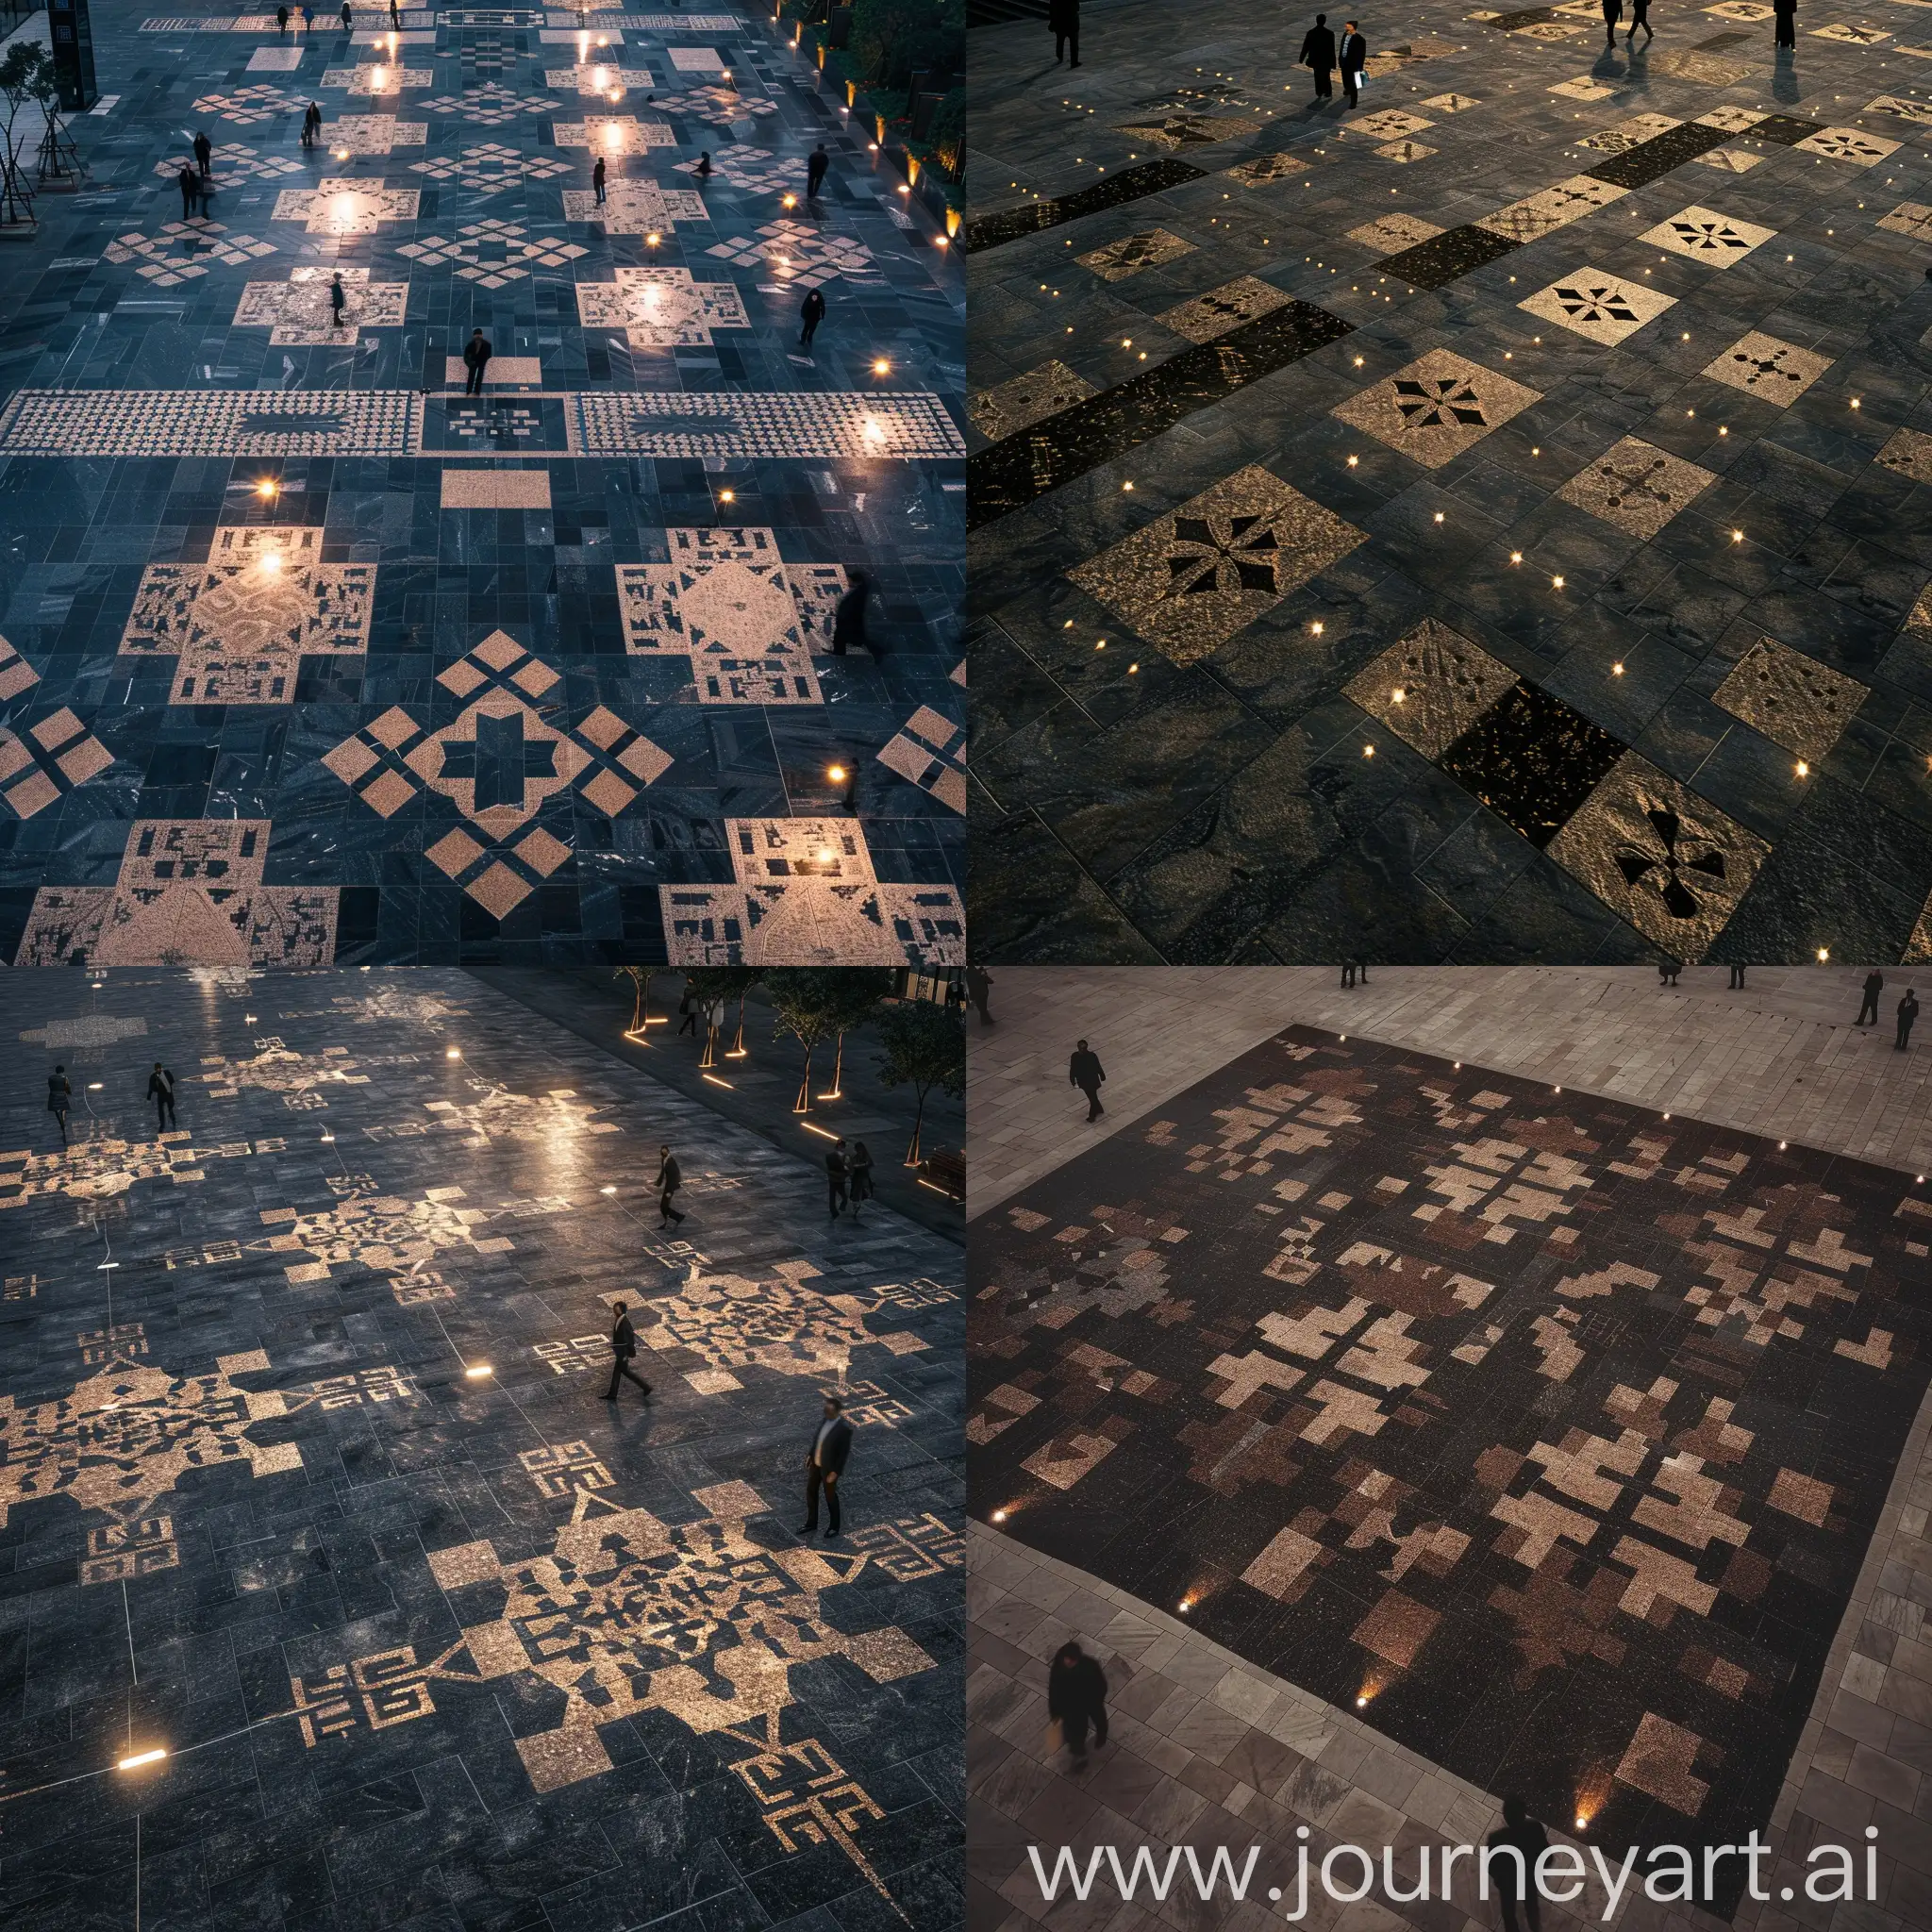 FolkPatterned-Granite-Plaza-Business-District-Aerial-View